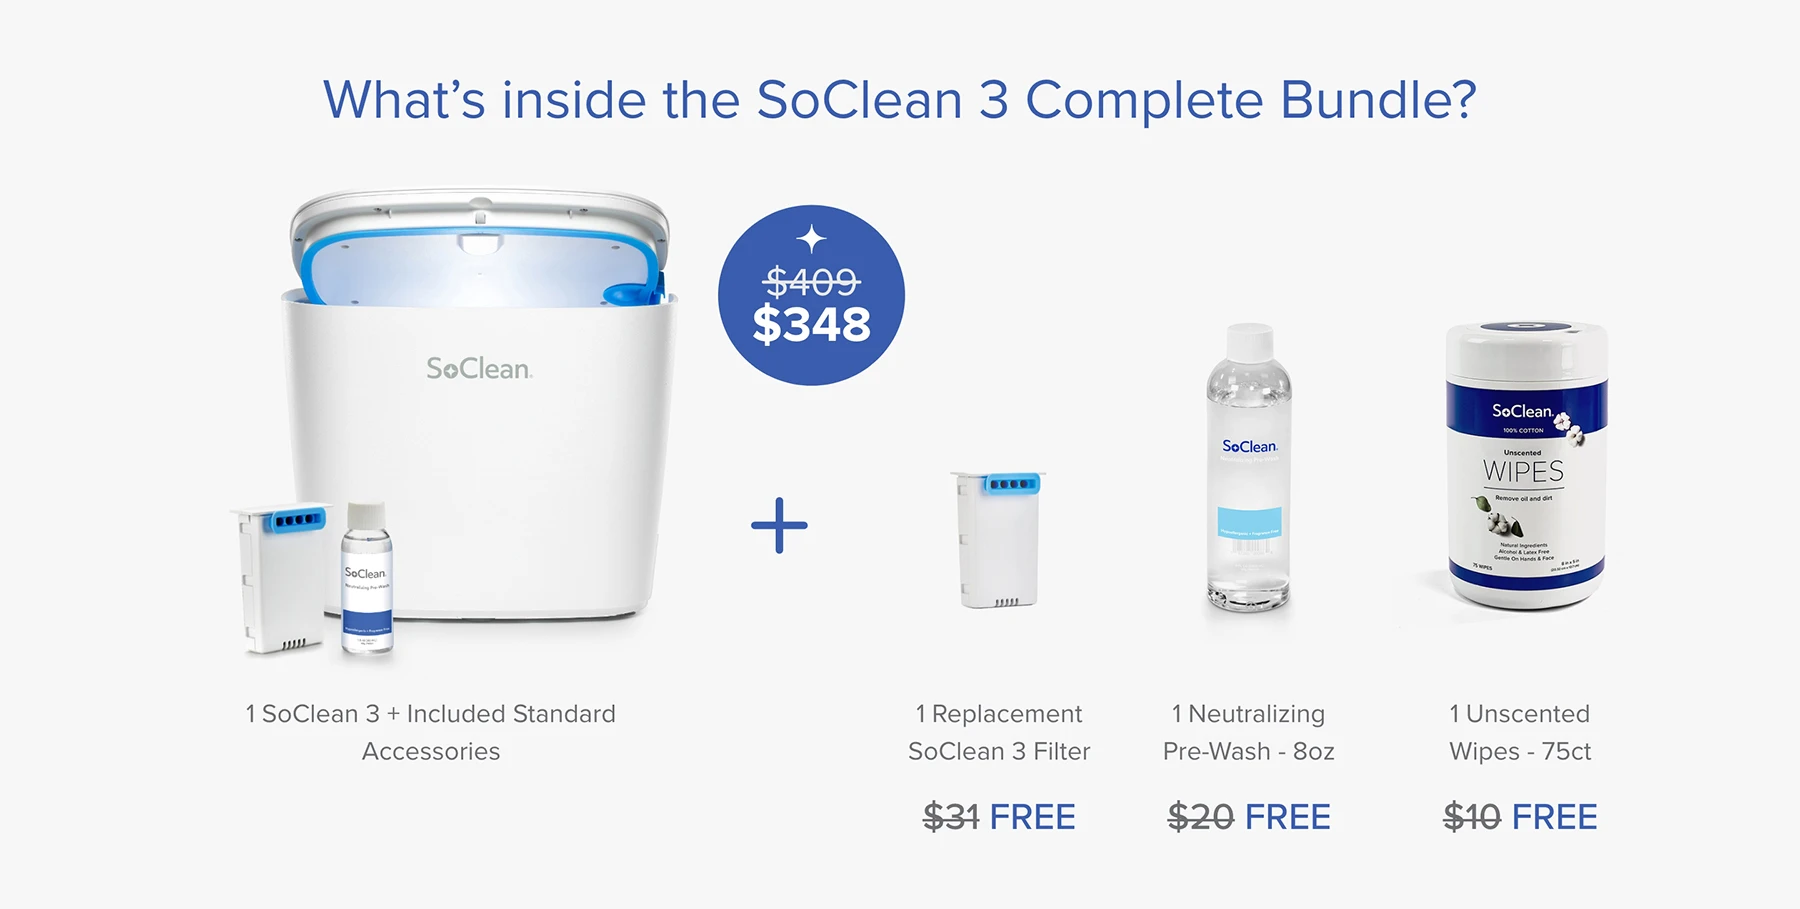 What is in the SoClean 3 Complete Bundle